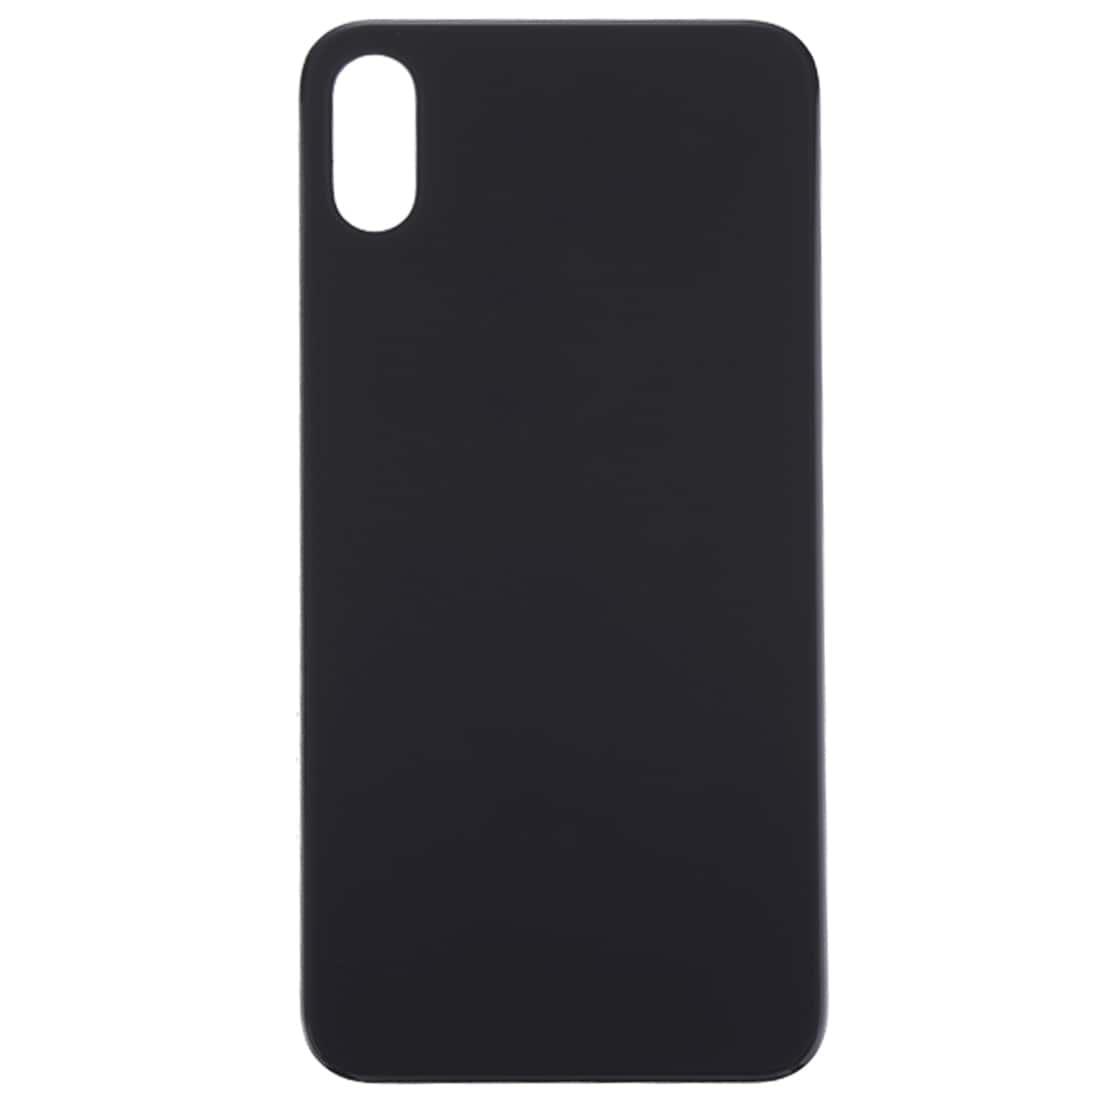 Back Glass Panel for  iPhone XS Max Black